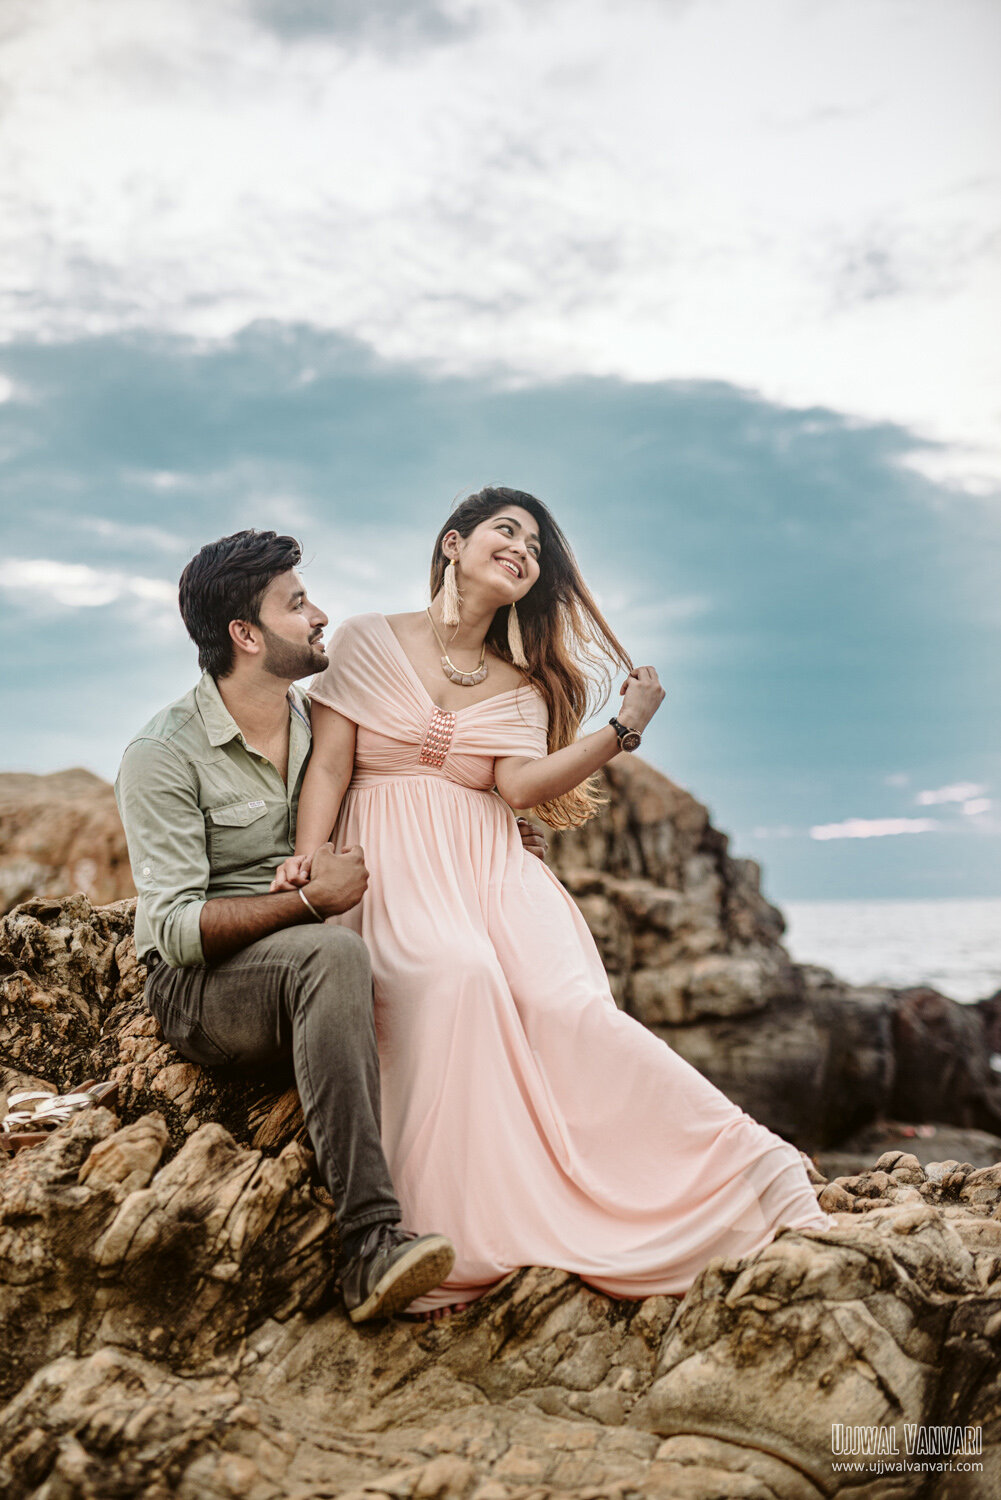 Private Photoshoot Experience in Goa